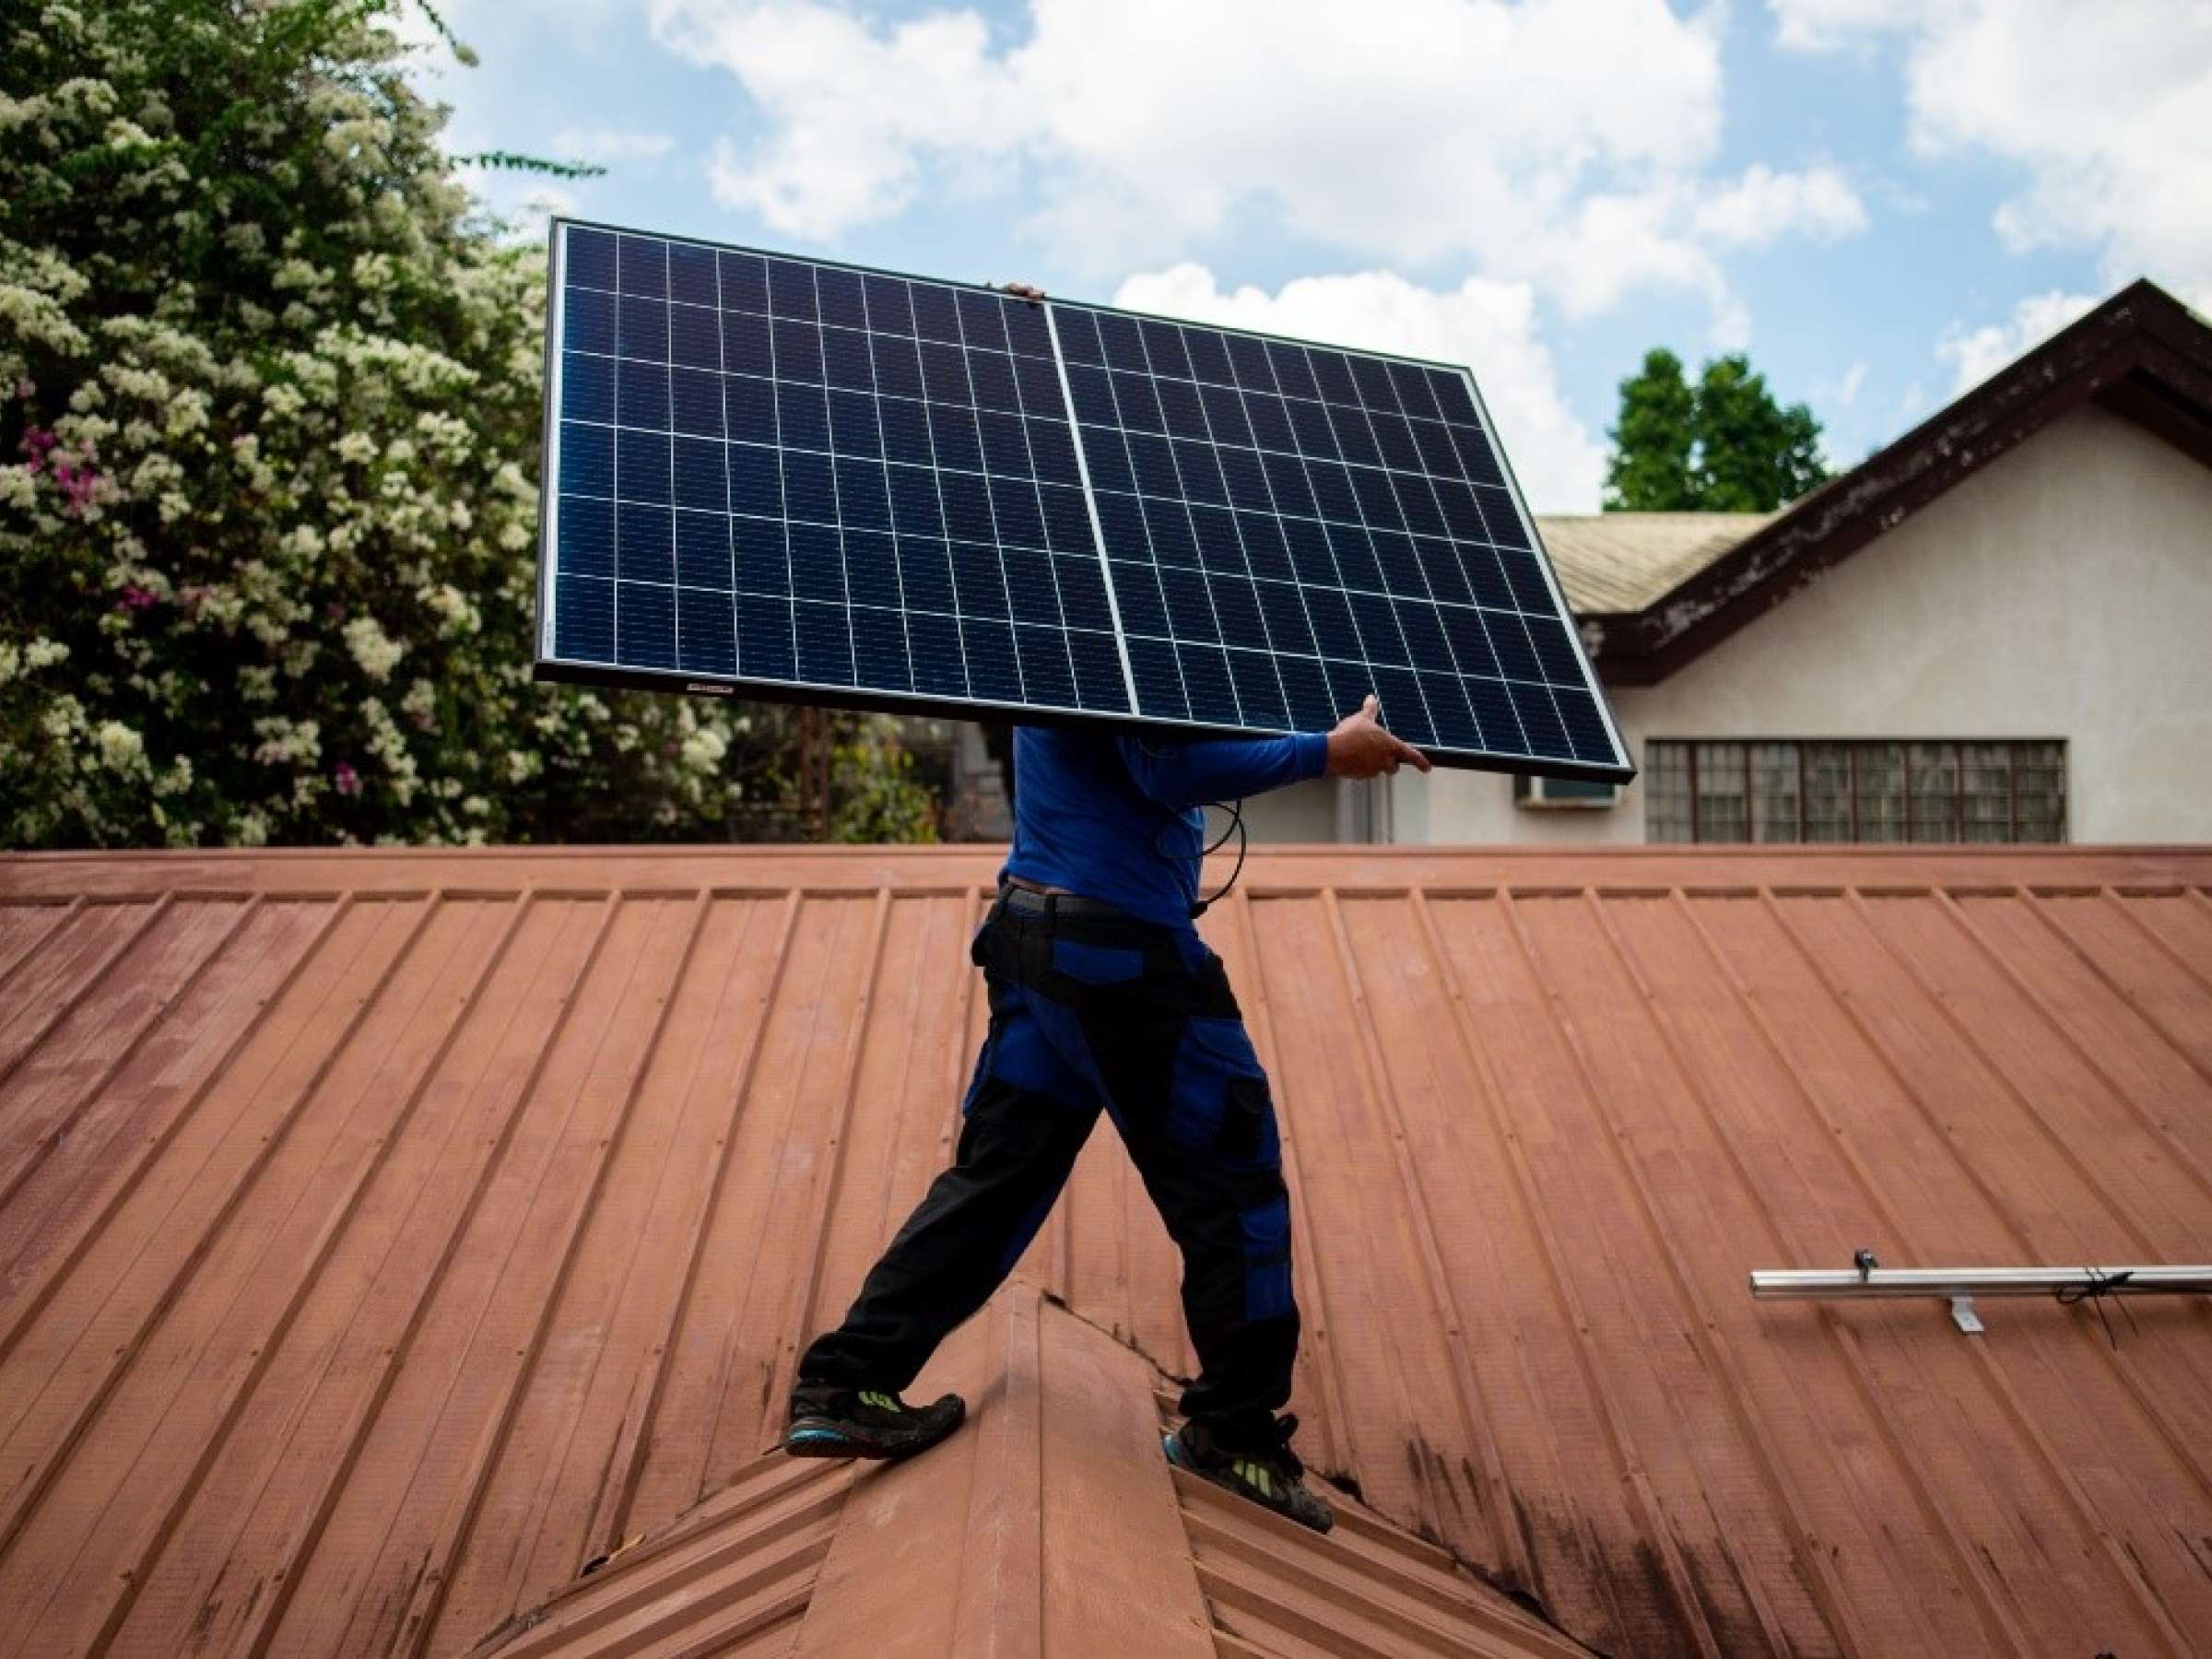 A worker from PHILERGY, a German-Filipino supplier and installer of solar energy, carries a solar panel during a home installation